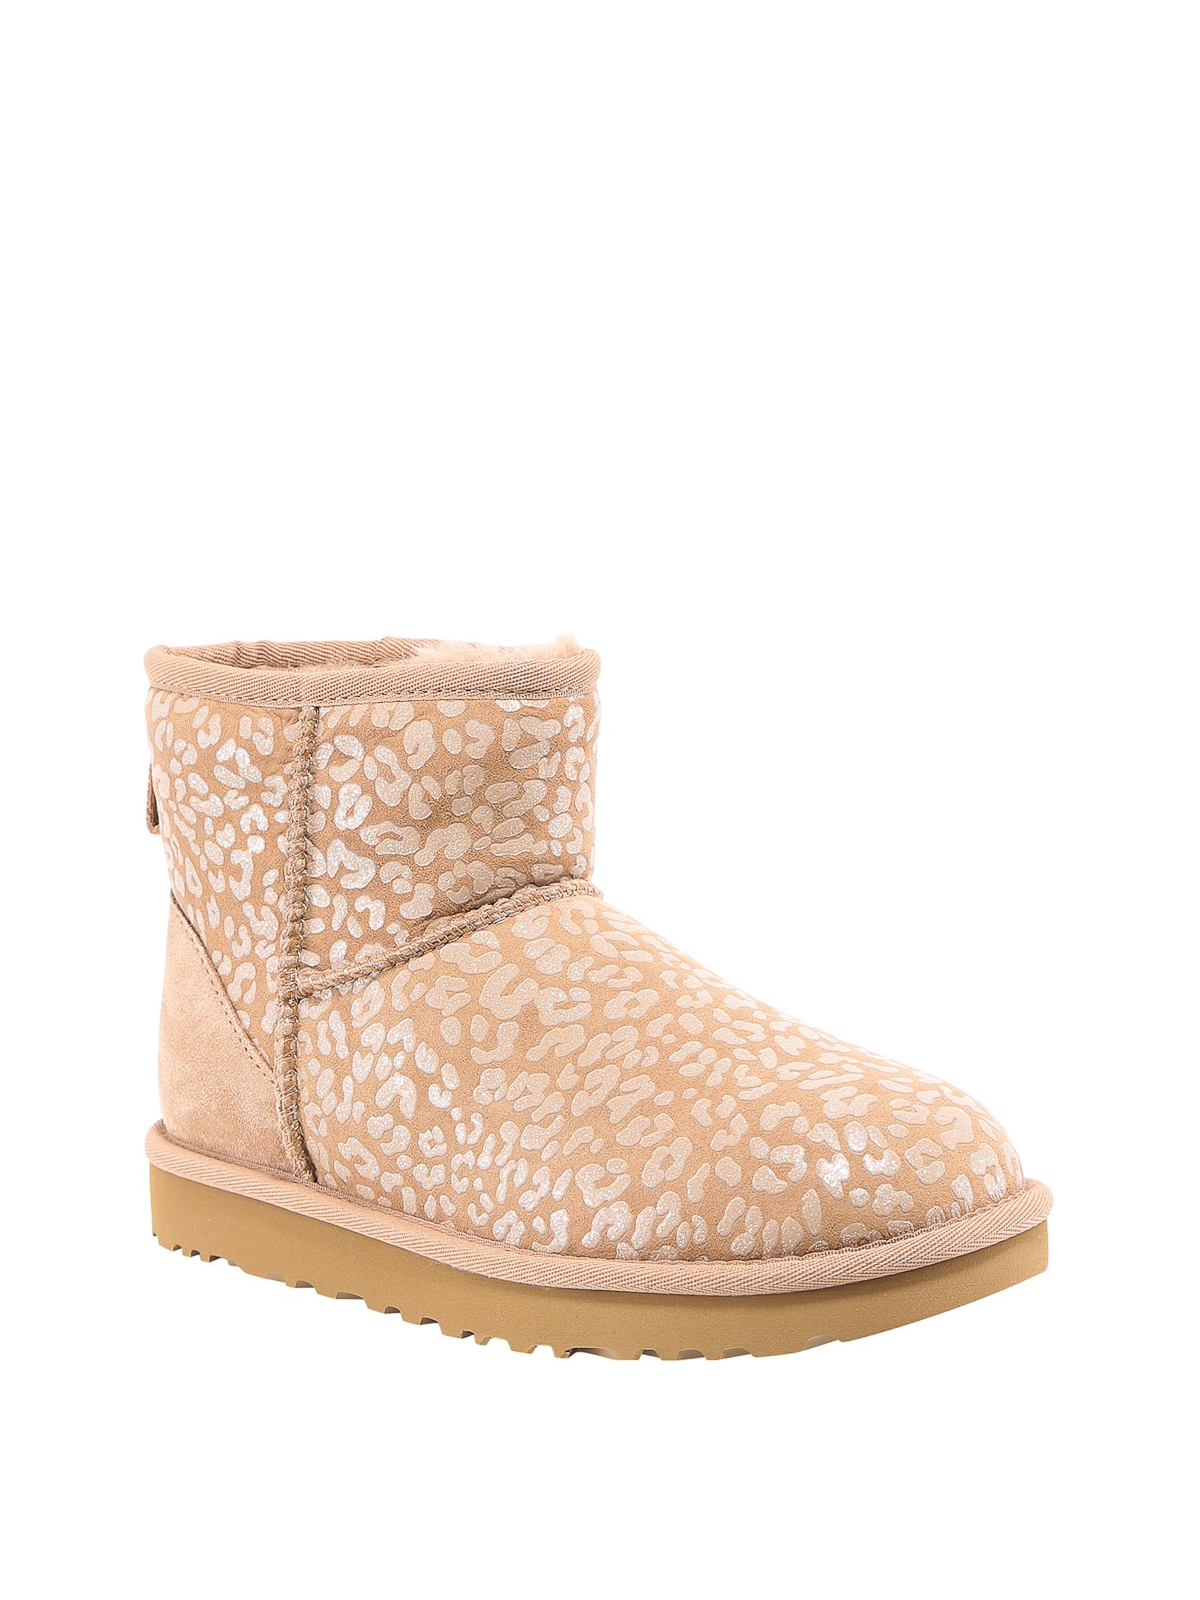 Ankle boots Ugg - Classic Mini leopard print booties - 1113494WSNOW